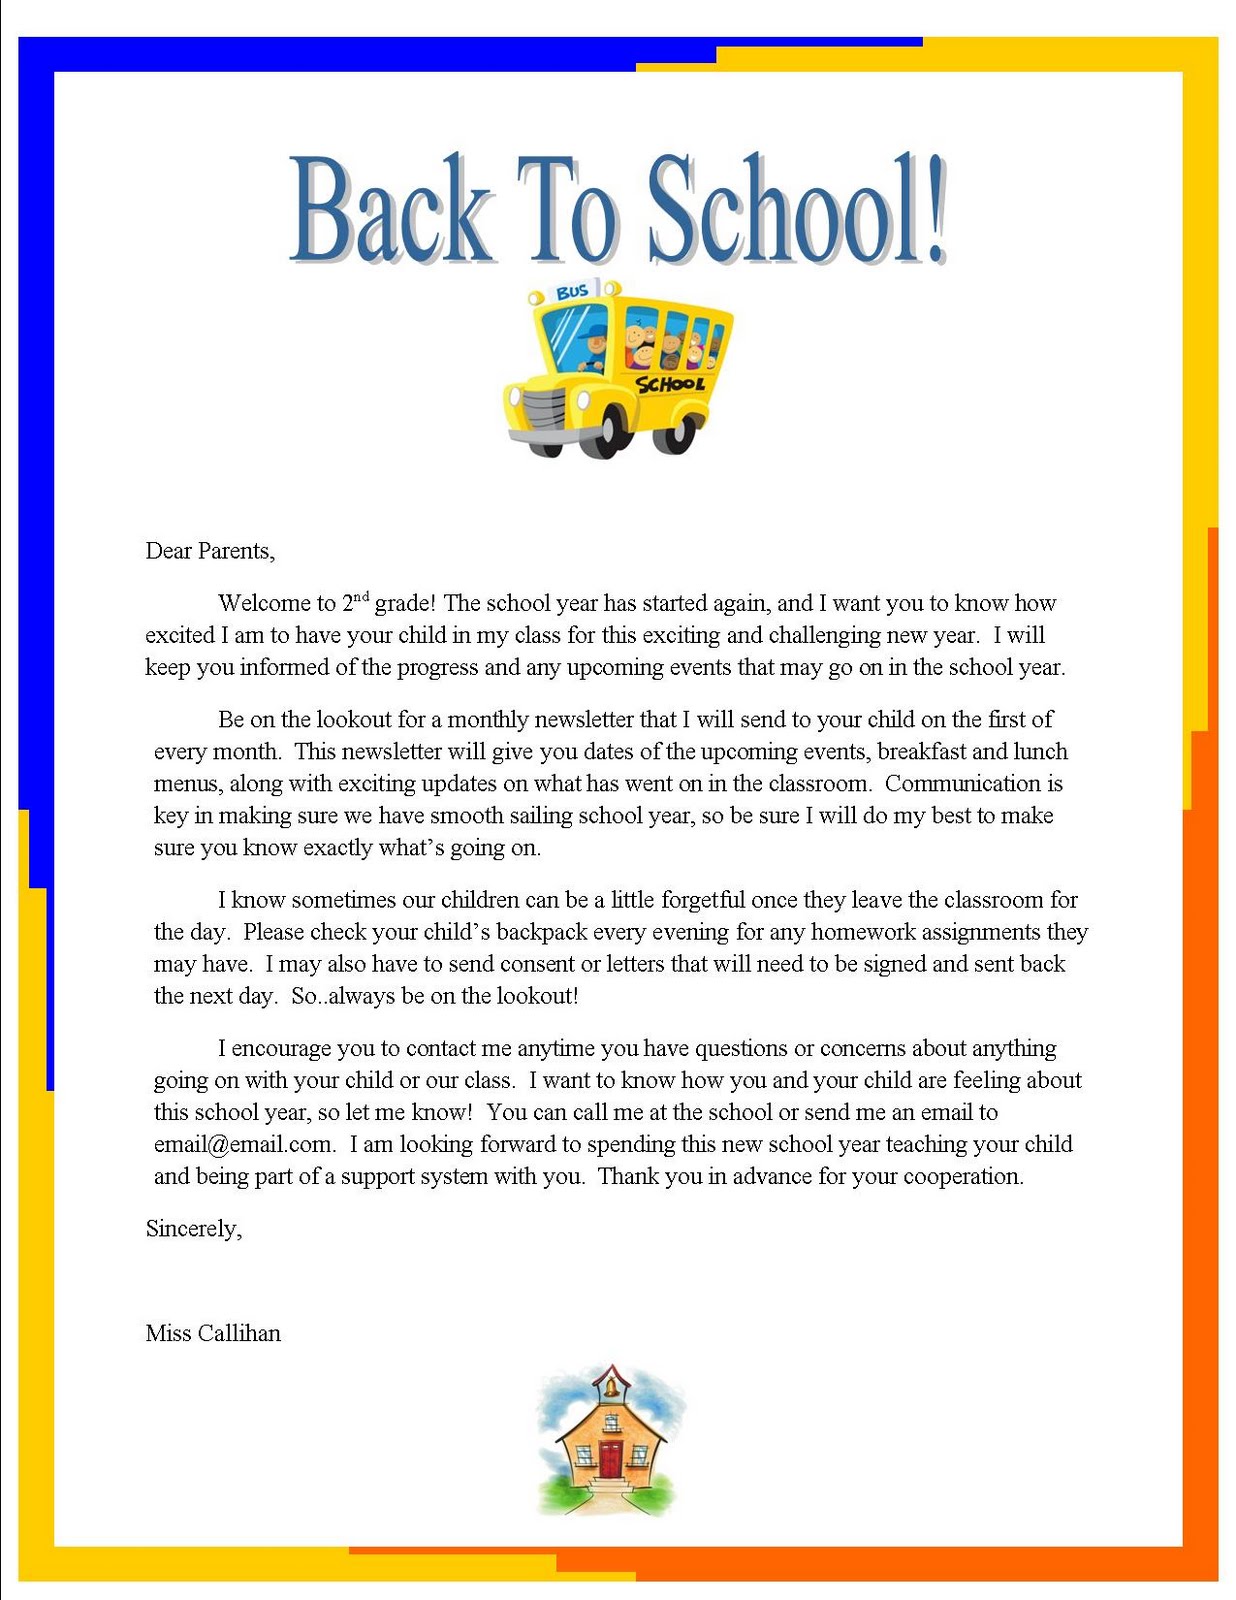 Emily S Blog Week 3 "Back To School" Letter To Parents